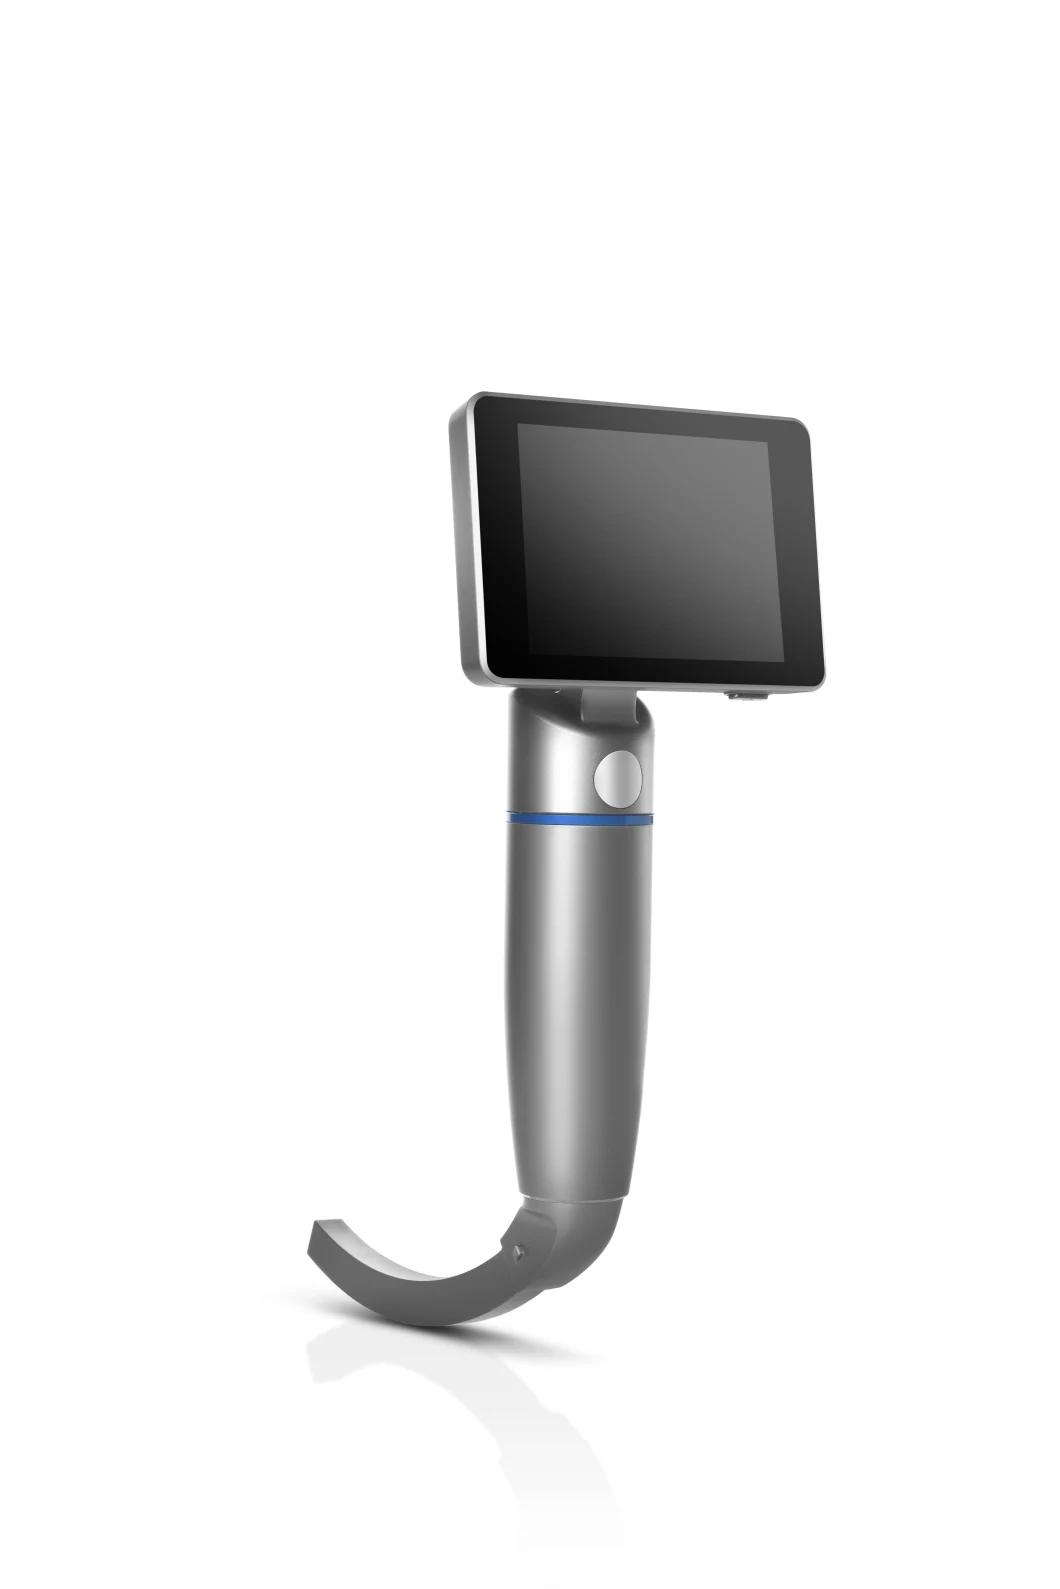 Surgical Instrument Anesthesia Laryngoscope with Camera